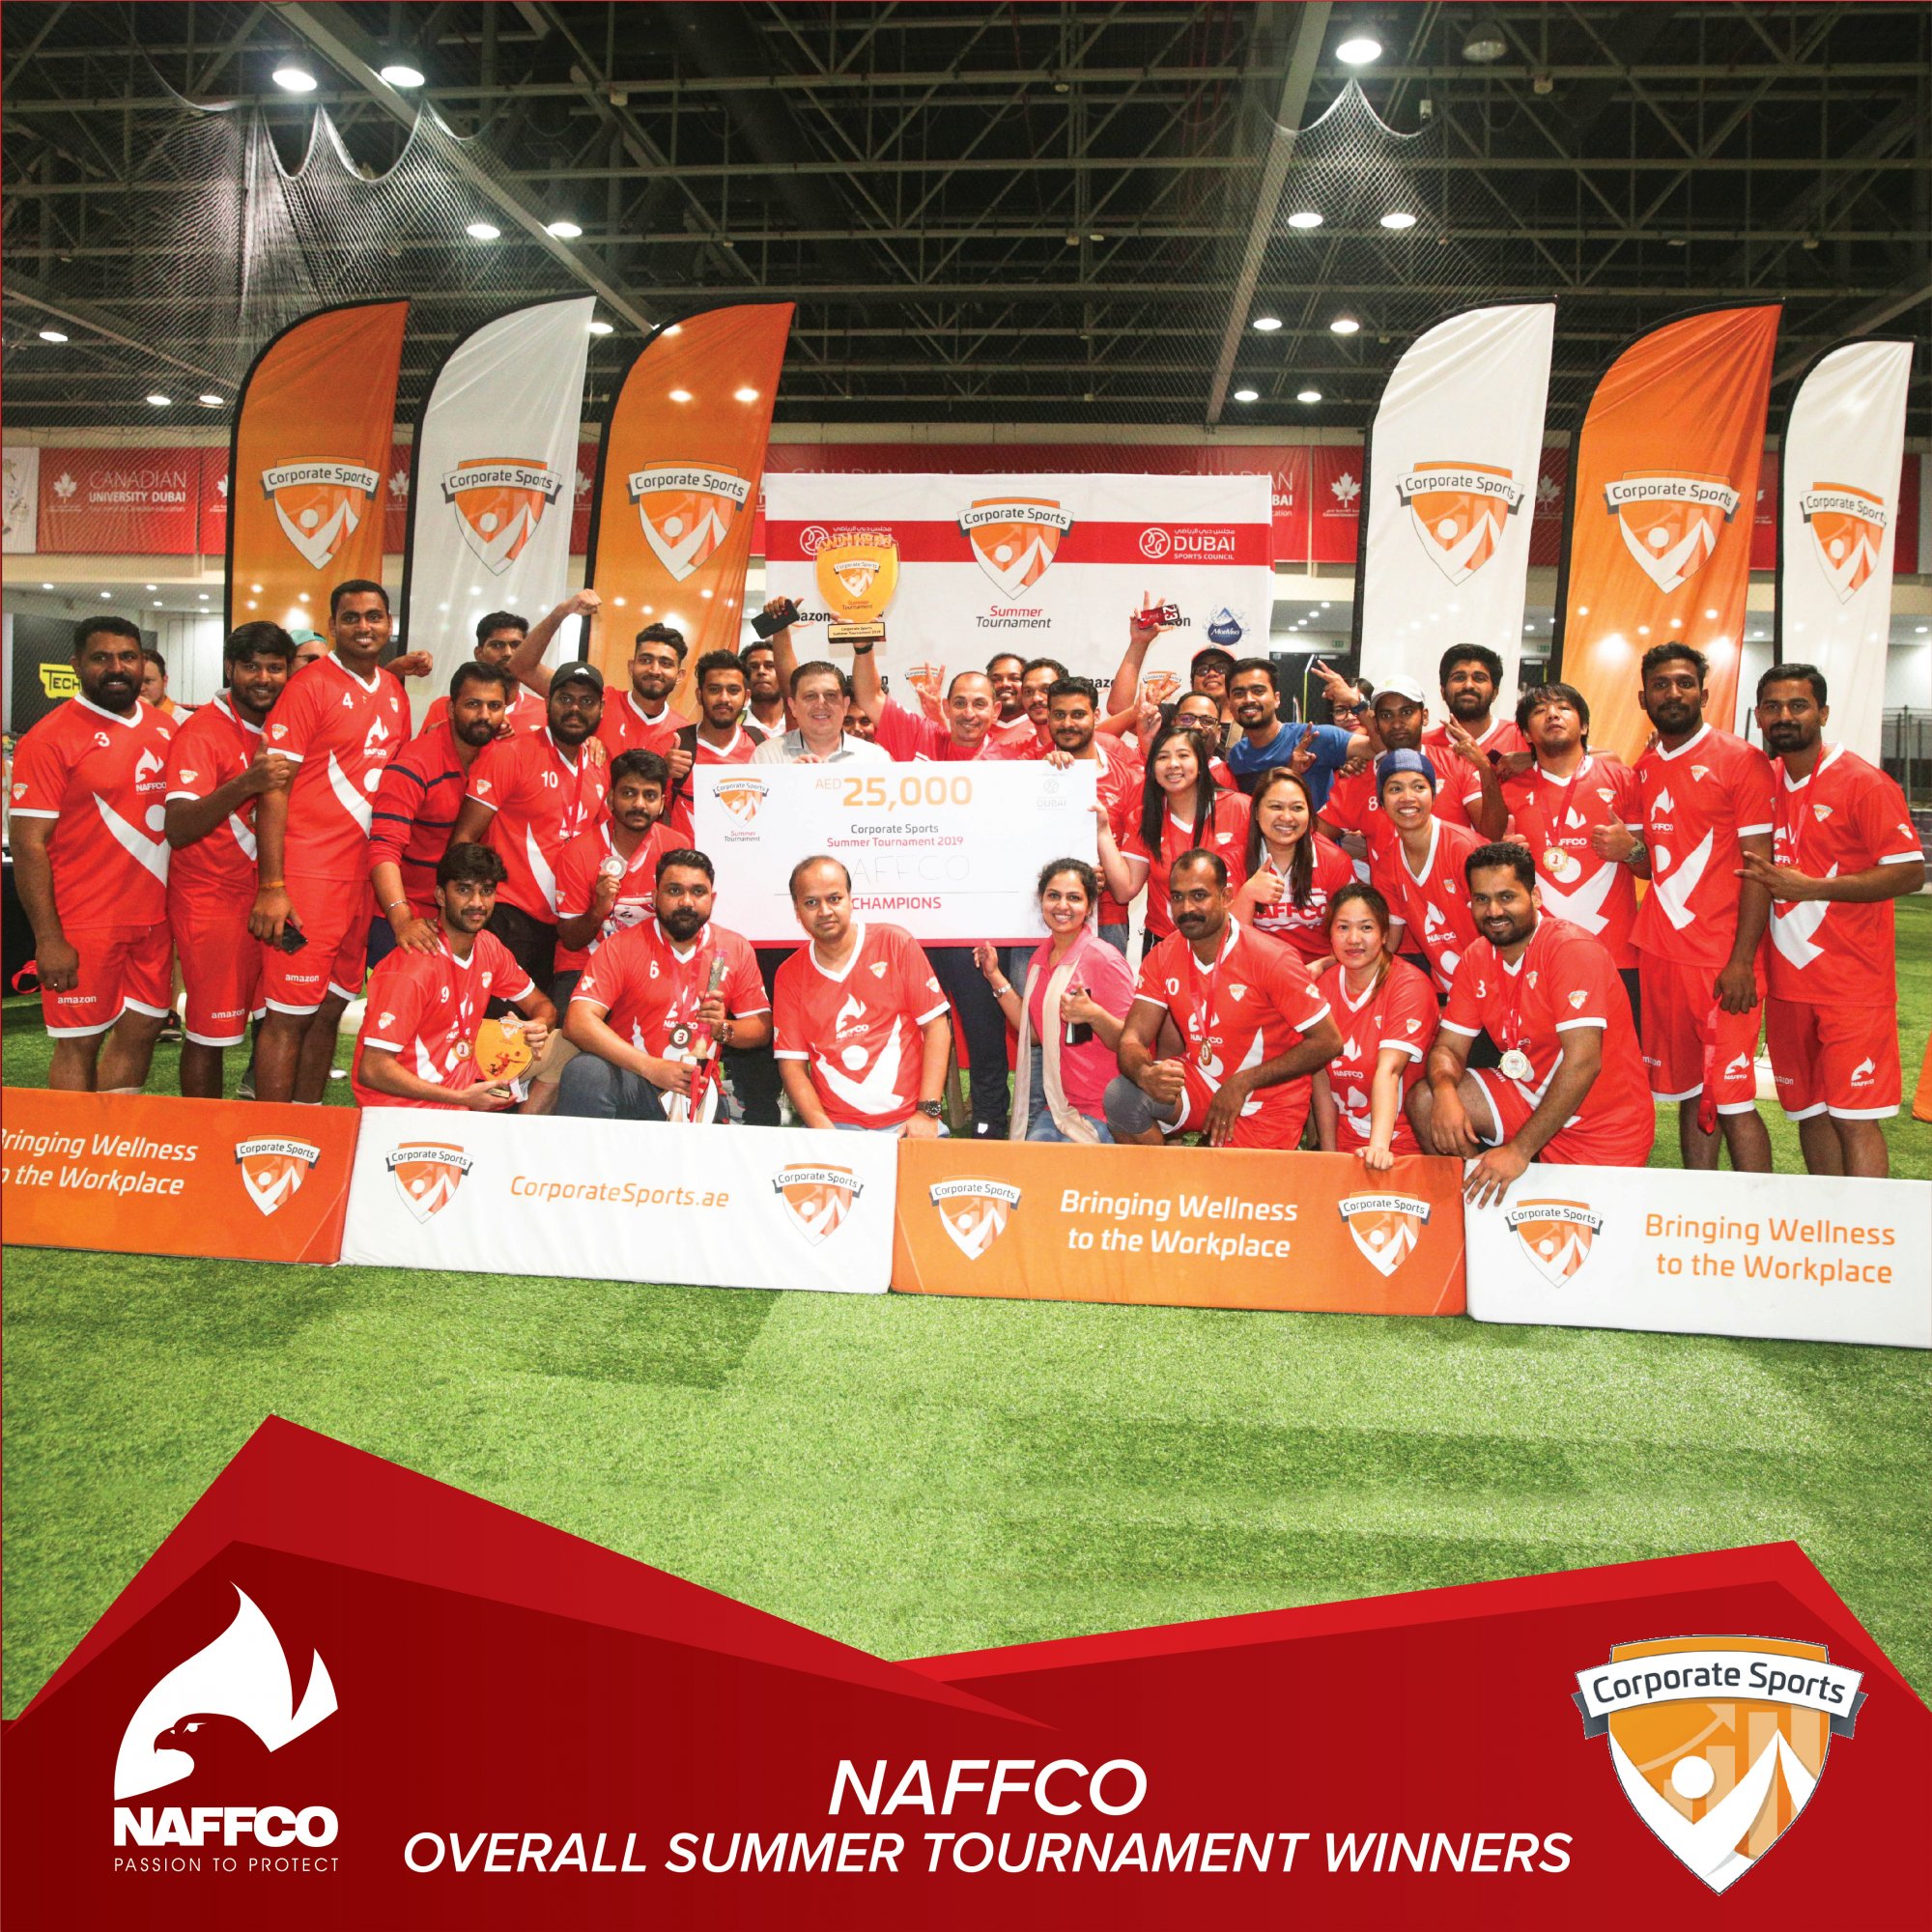 NAFFCO wins First Position in Volleyball, Badminton, Table Tennis, Over all Tournament organized by Corporate Sports 2019 